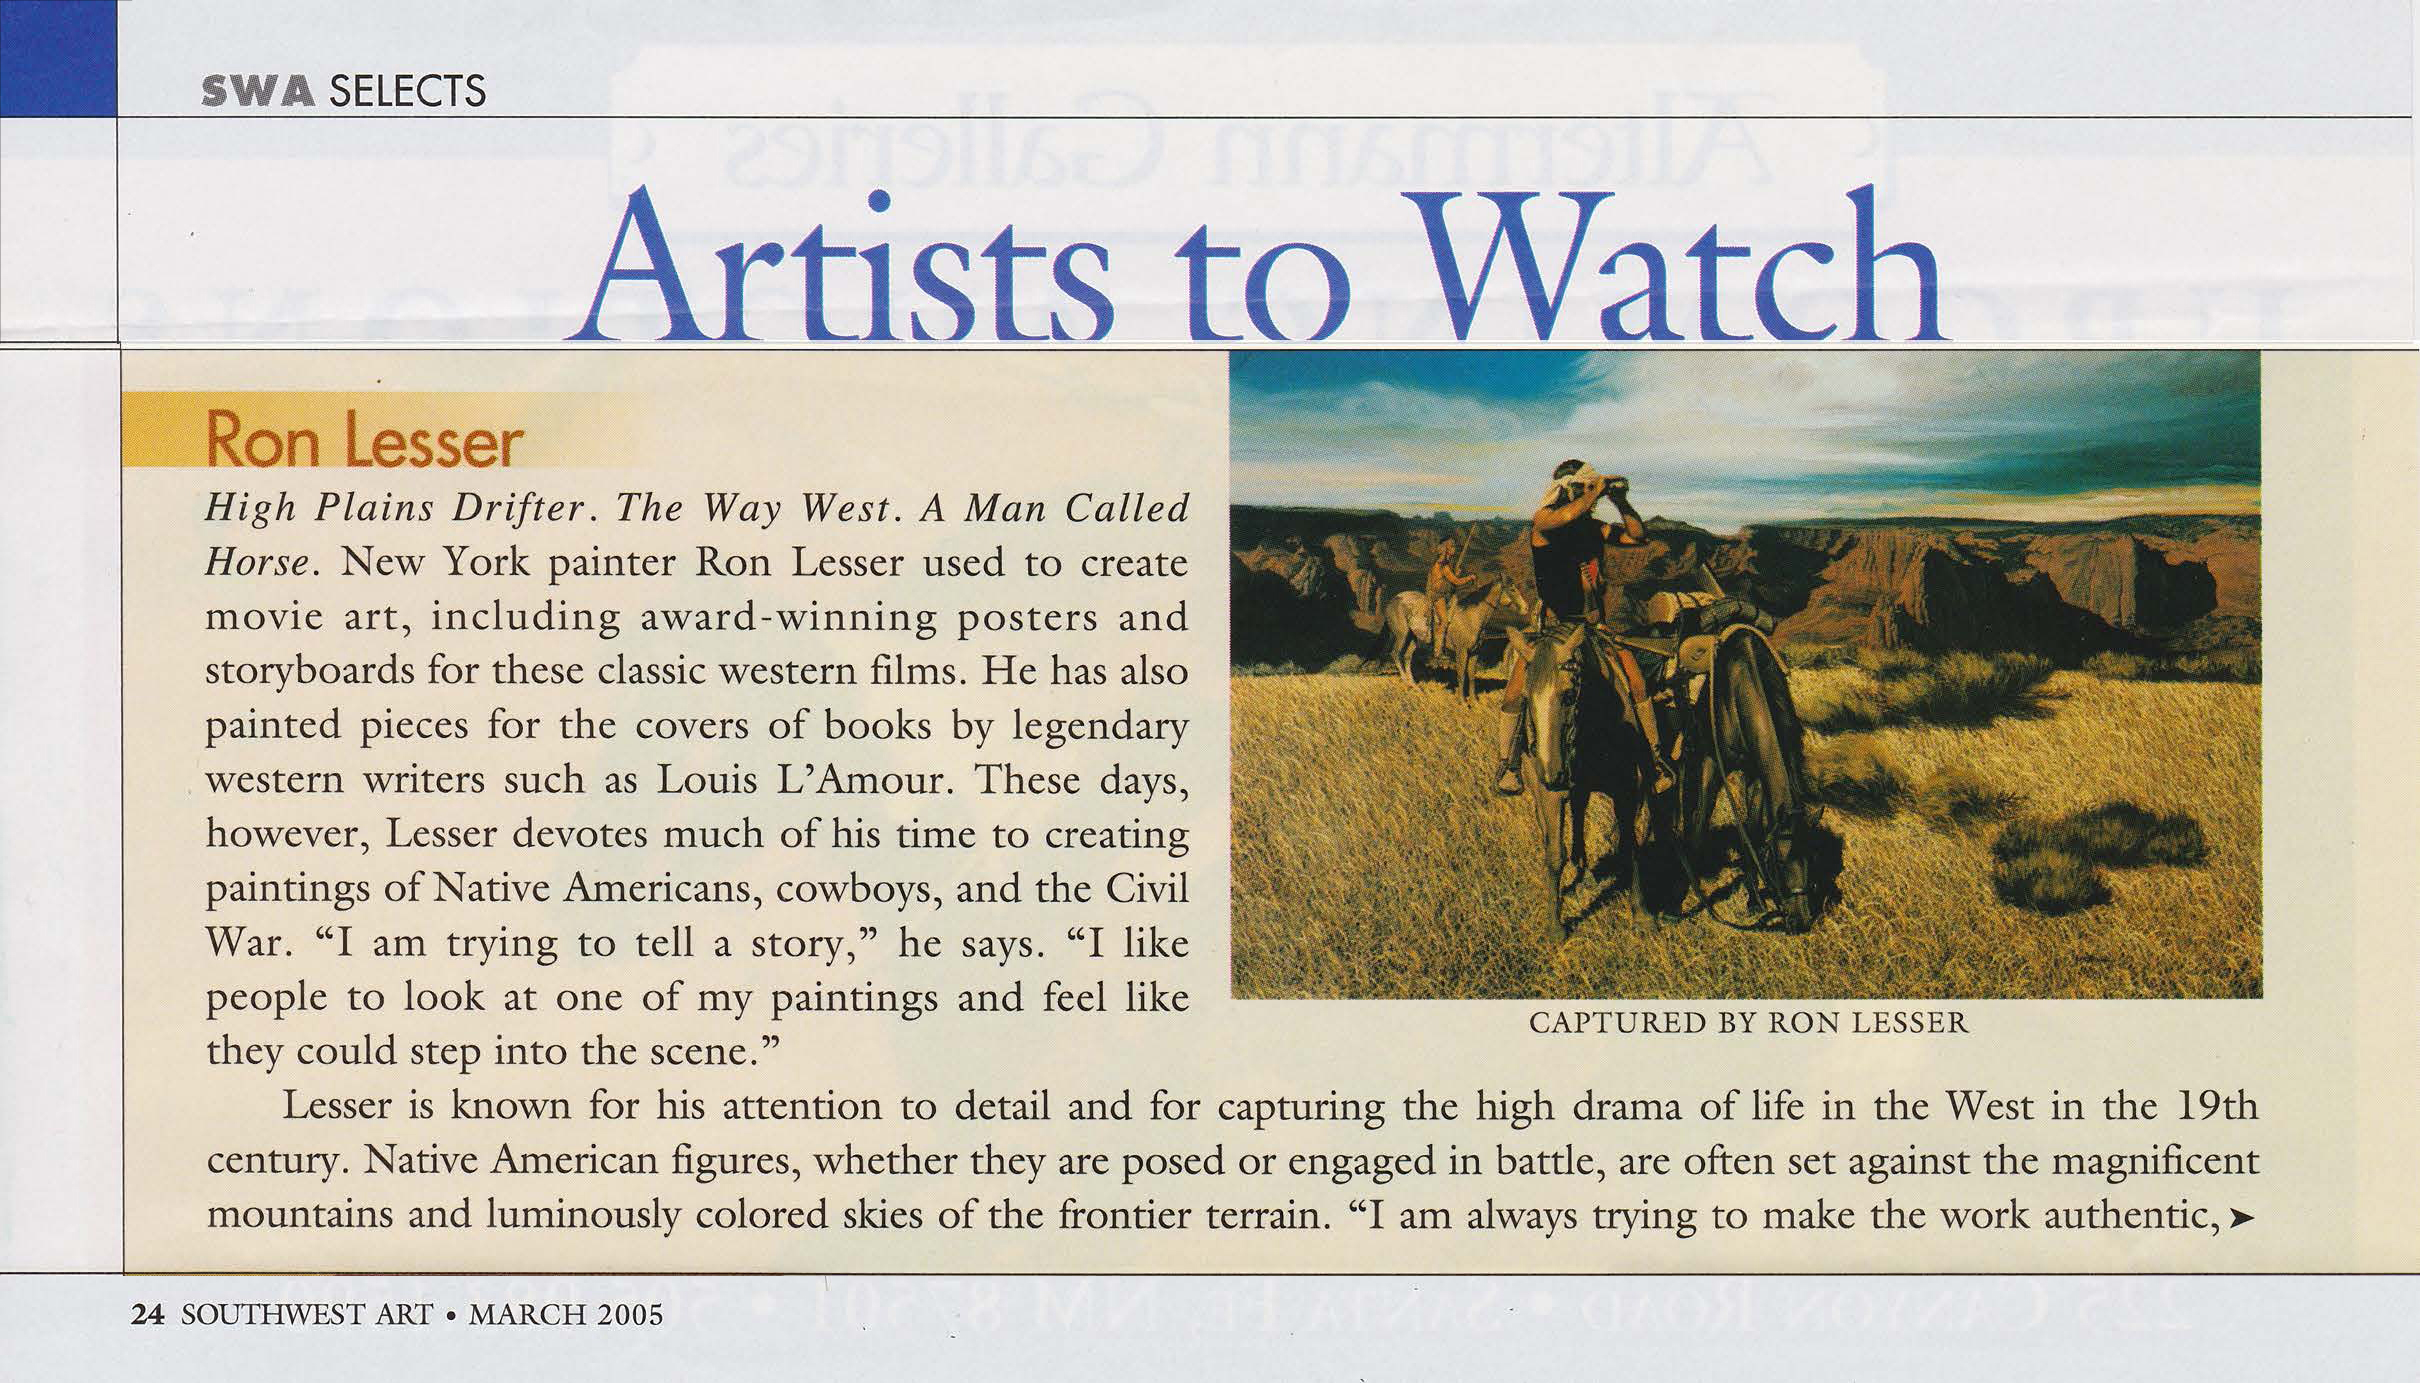 South West Art interview with Ron Lesser - March 2006